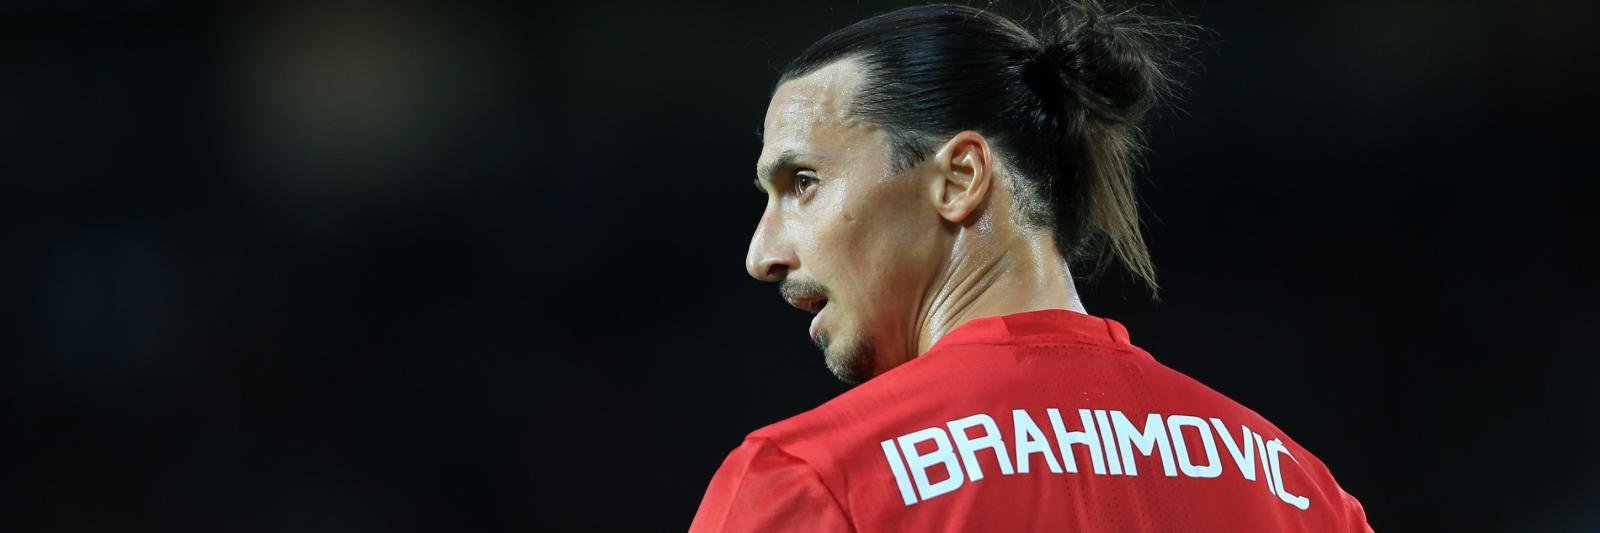 Laud £89m Pogba, but the best things in life are free (Ibrahimovic)